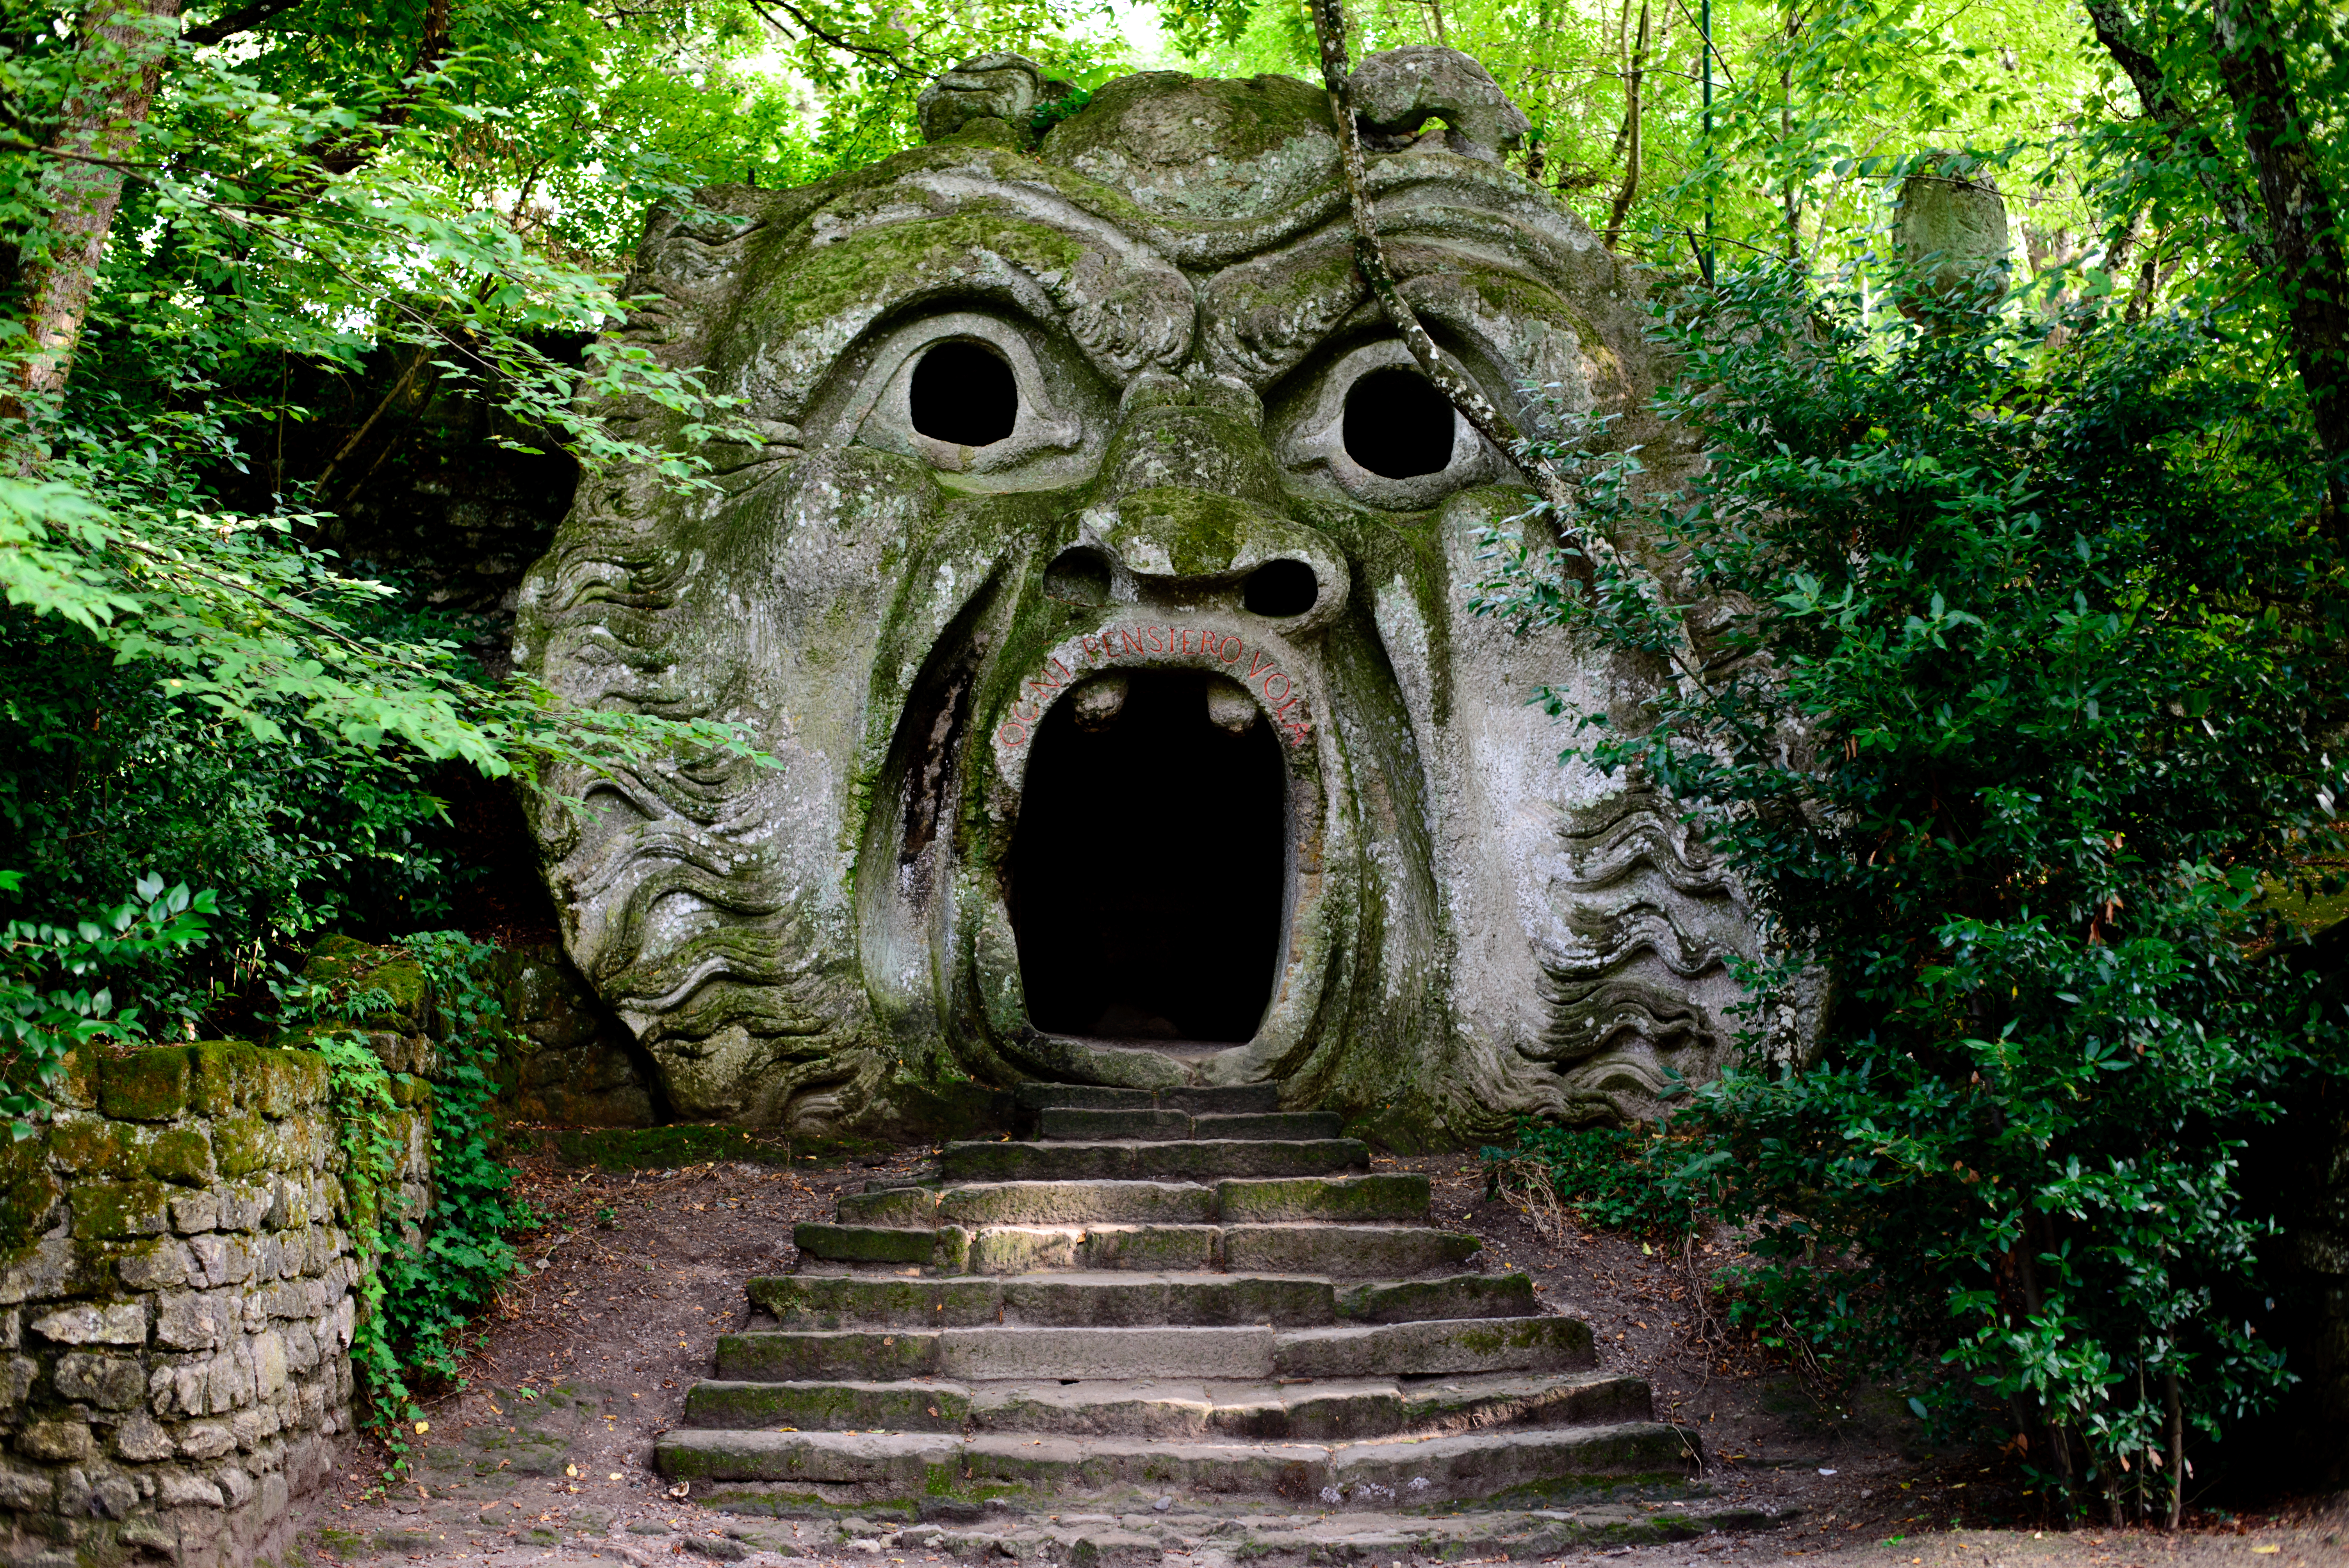 Cave entrance with rock shaped into a face | Source: Getty Images